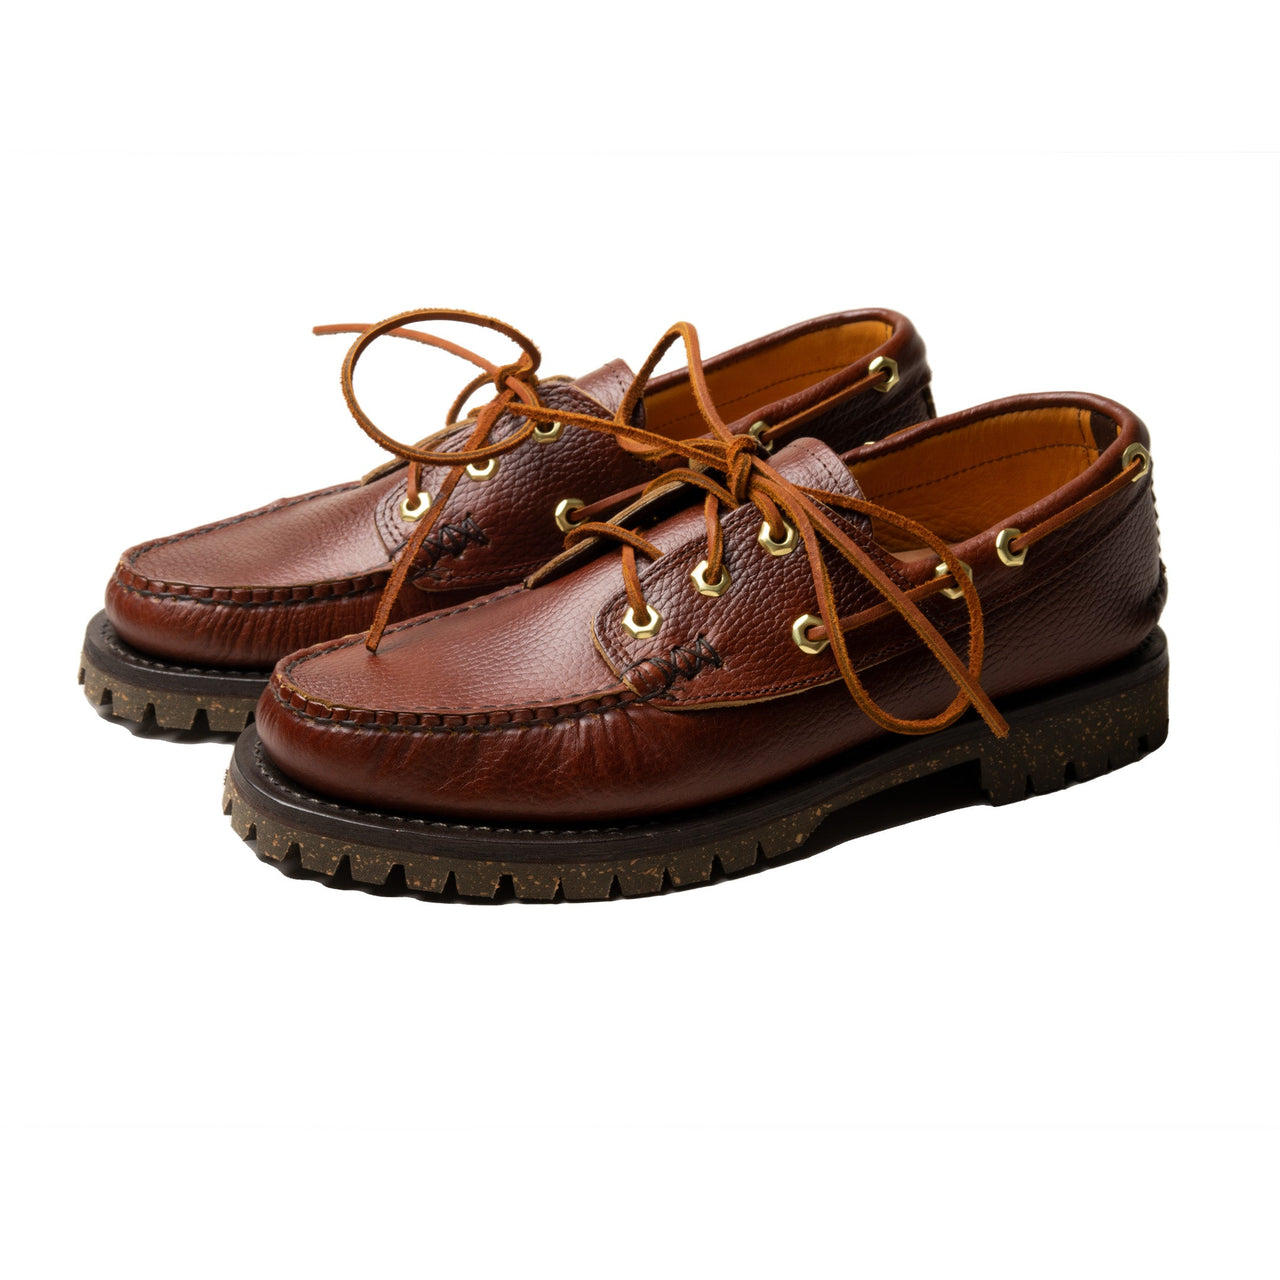 Yuketen Hex Eye Boat Shoes w/Lug Sole Grizzly Brown-shoes-Clutch Cafe